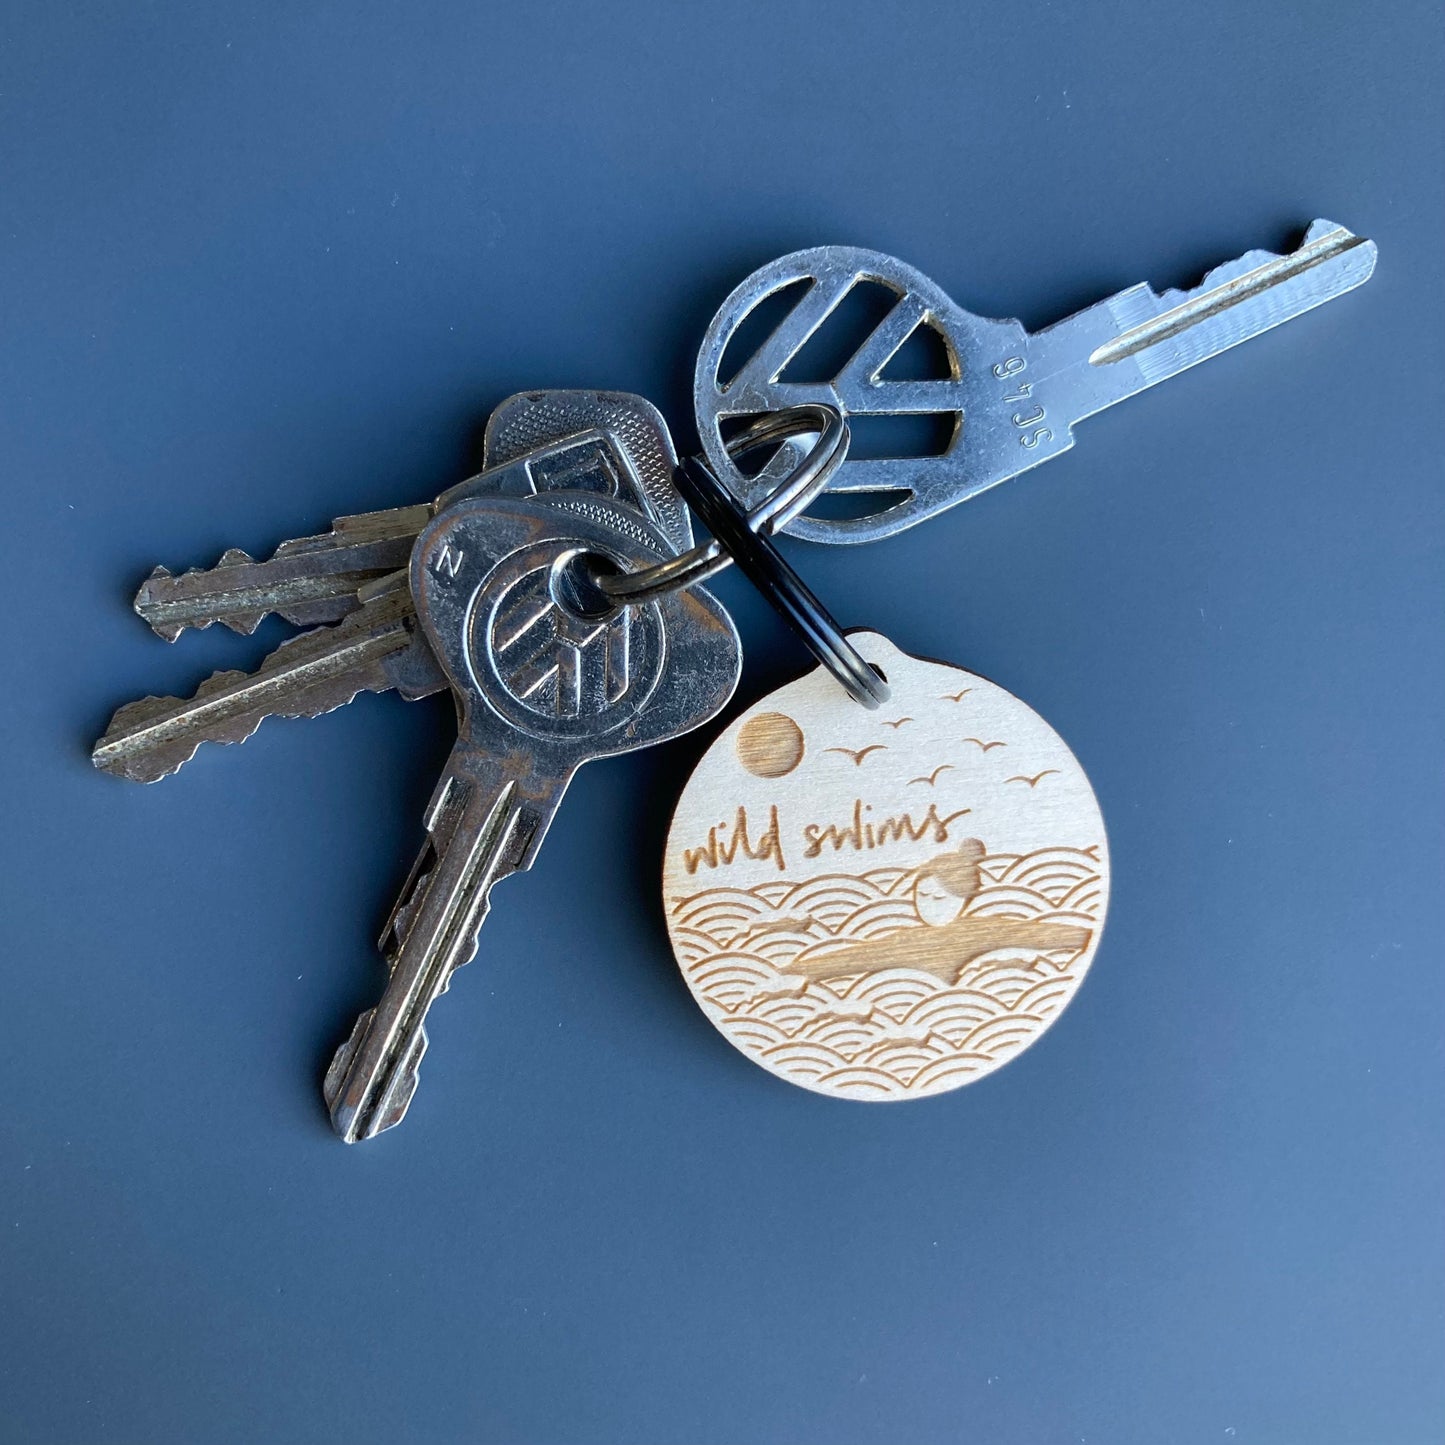 Wild swims key fob with ring | laser cut and etched birch plywood